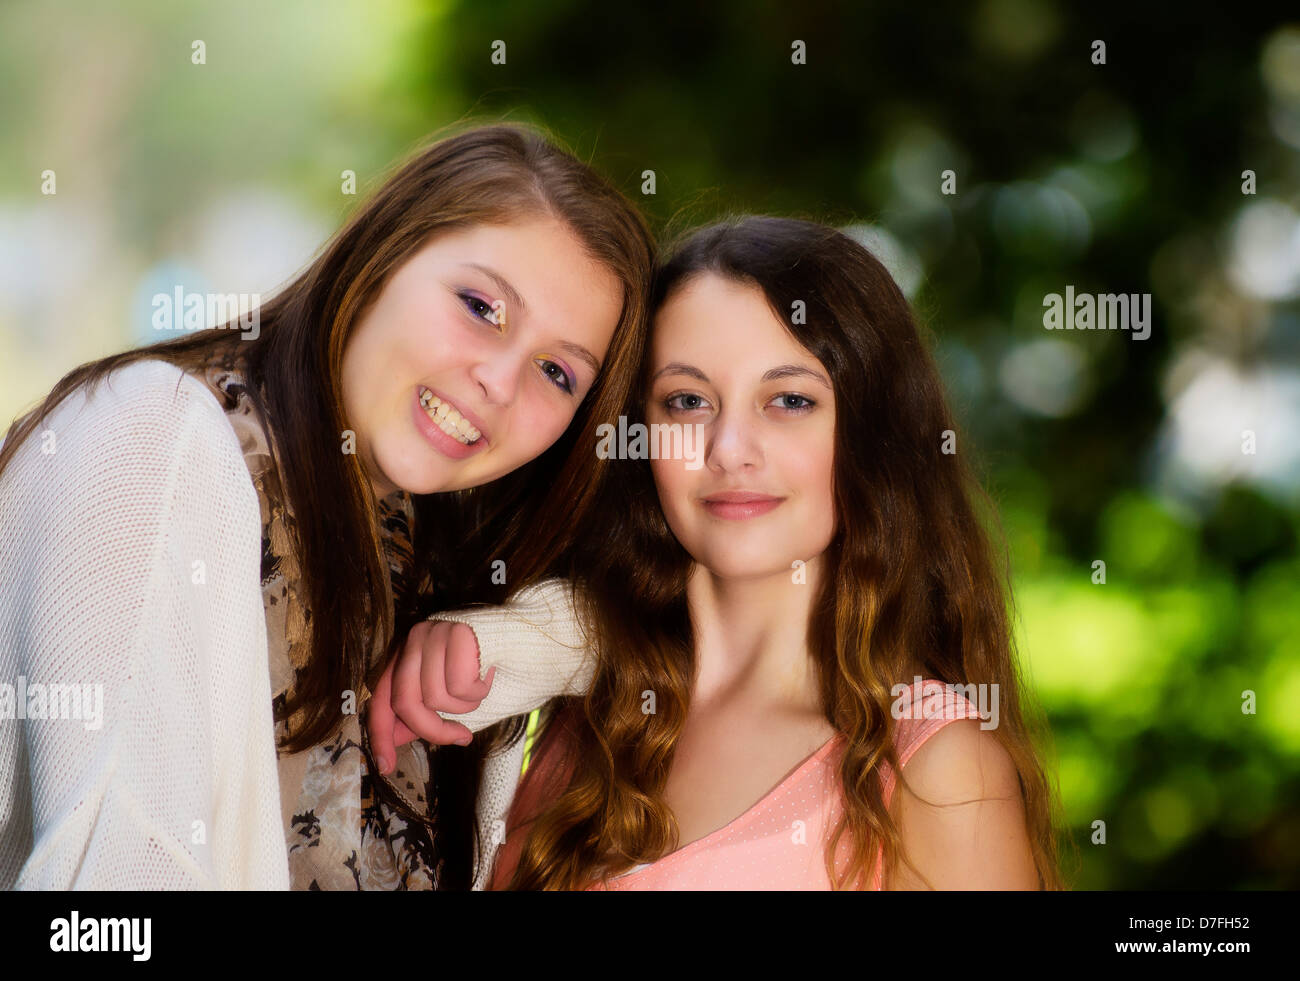 Two young girls pose for a portrait Stock Photo